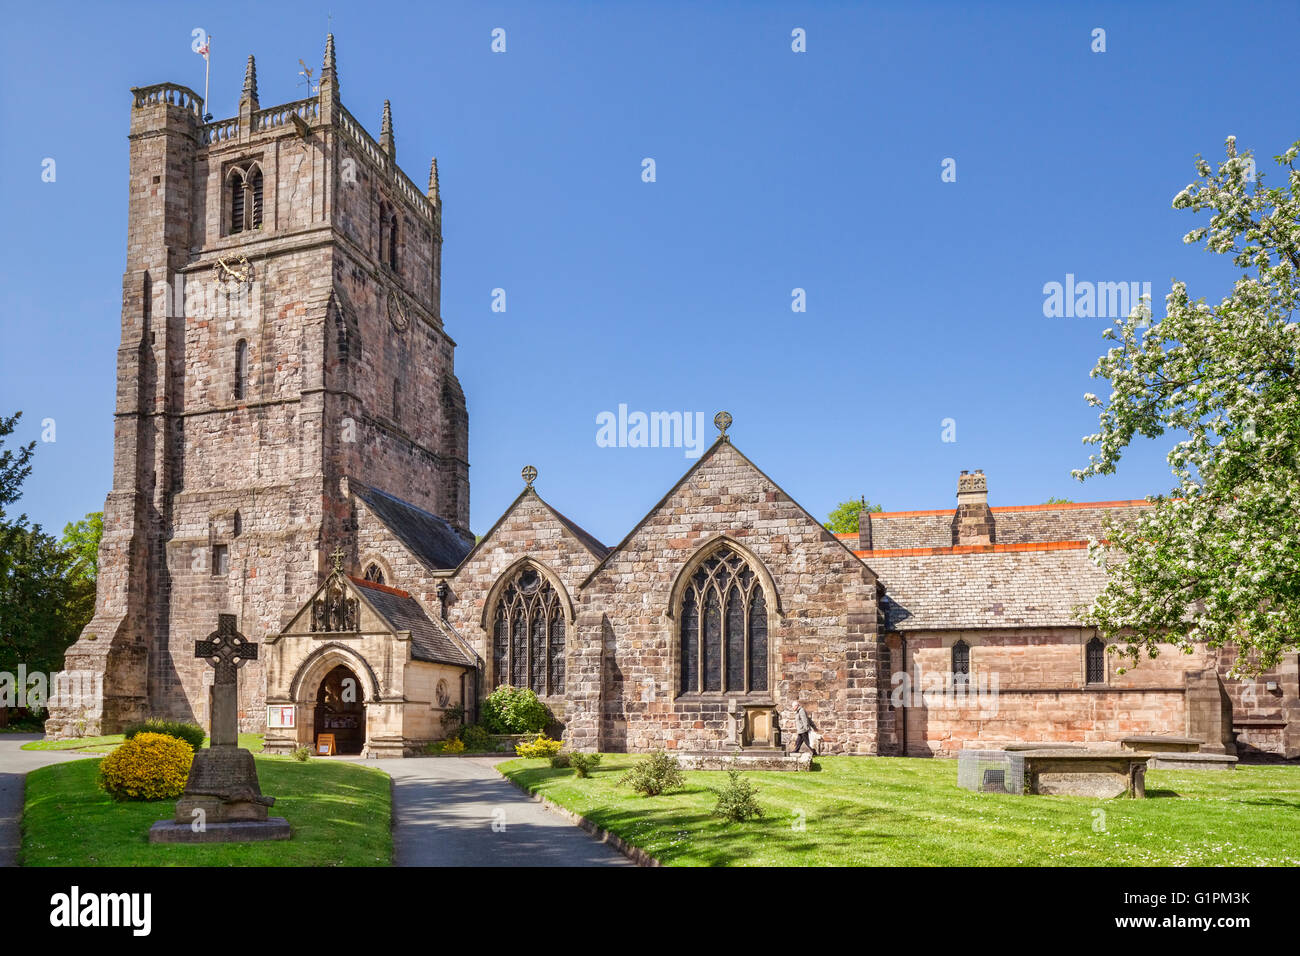 St Oswald chiesa Parrocchiale, Oswestry, Shropshire, Inghilterra. Foto Stock